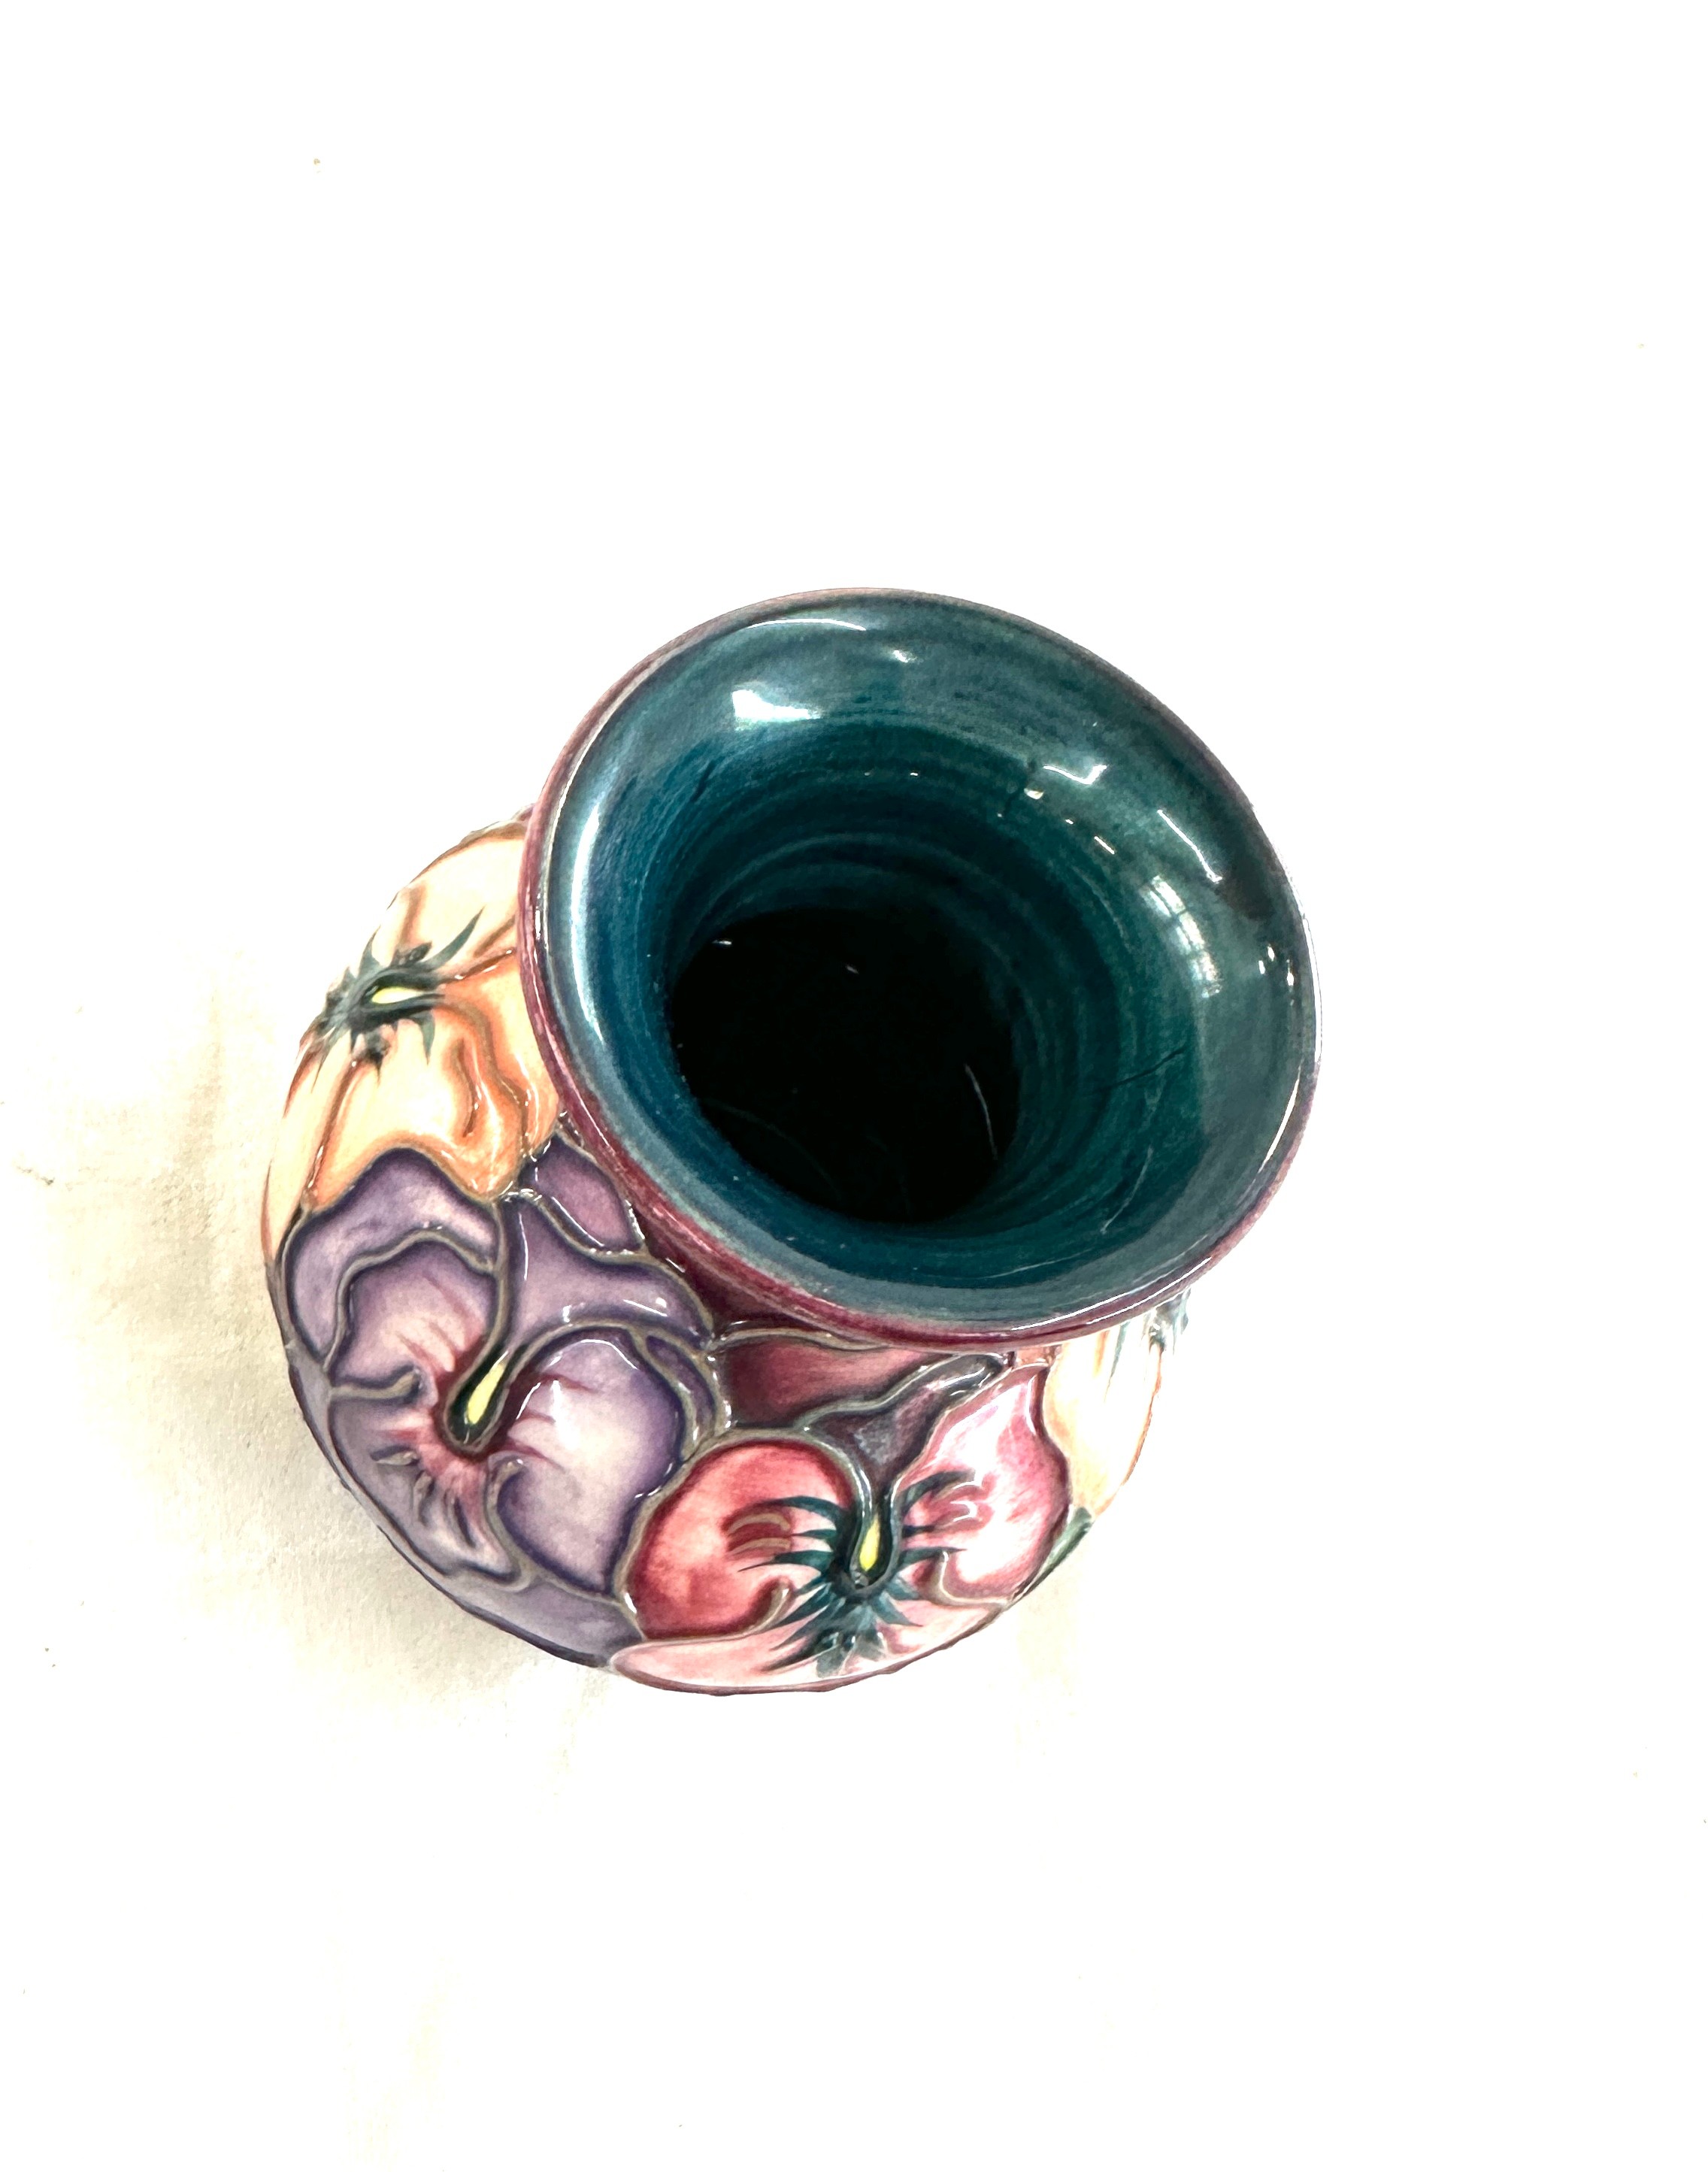 1993 Moorcroft potter vase 3.5 inches tall - Image 3 of 5